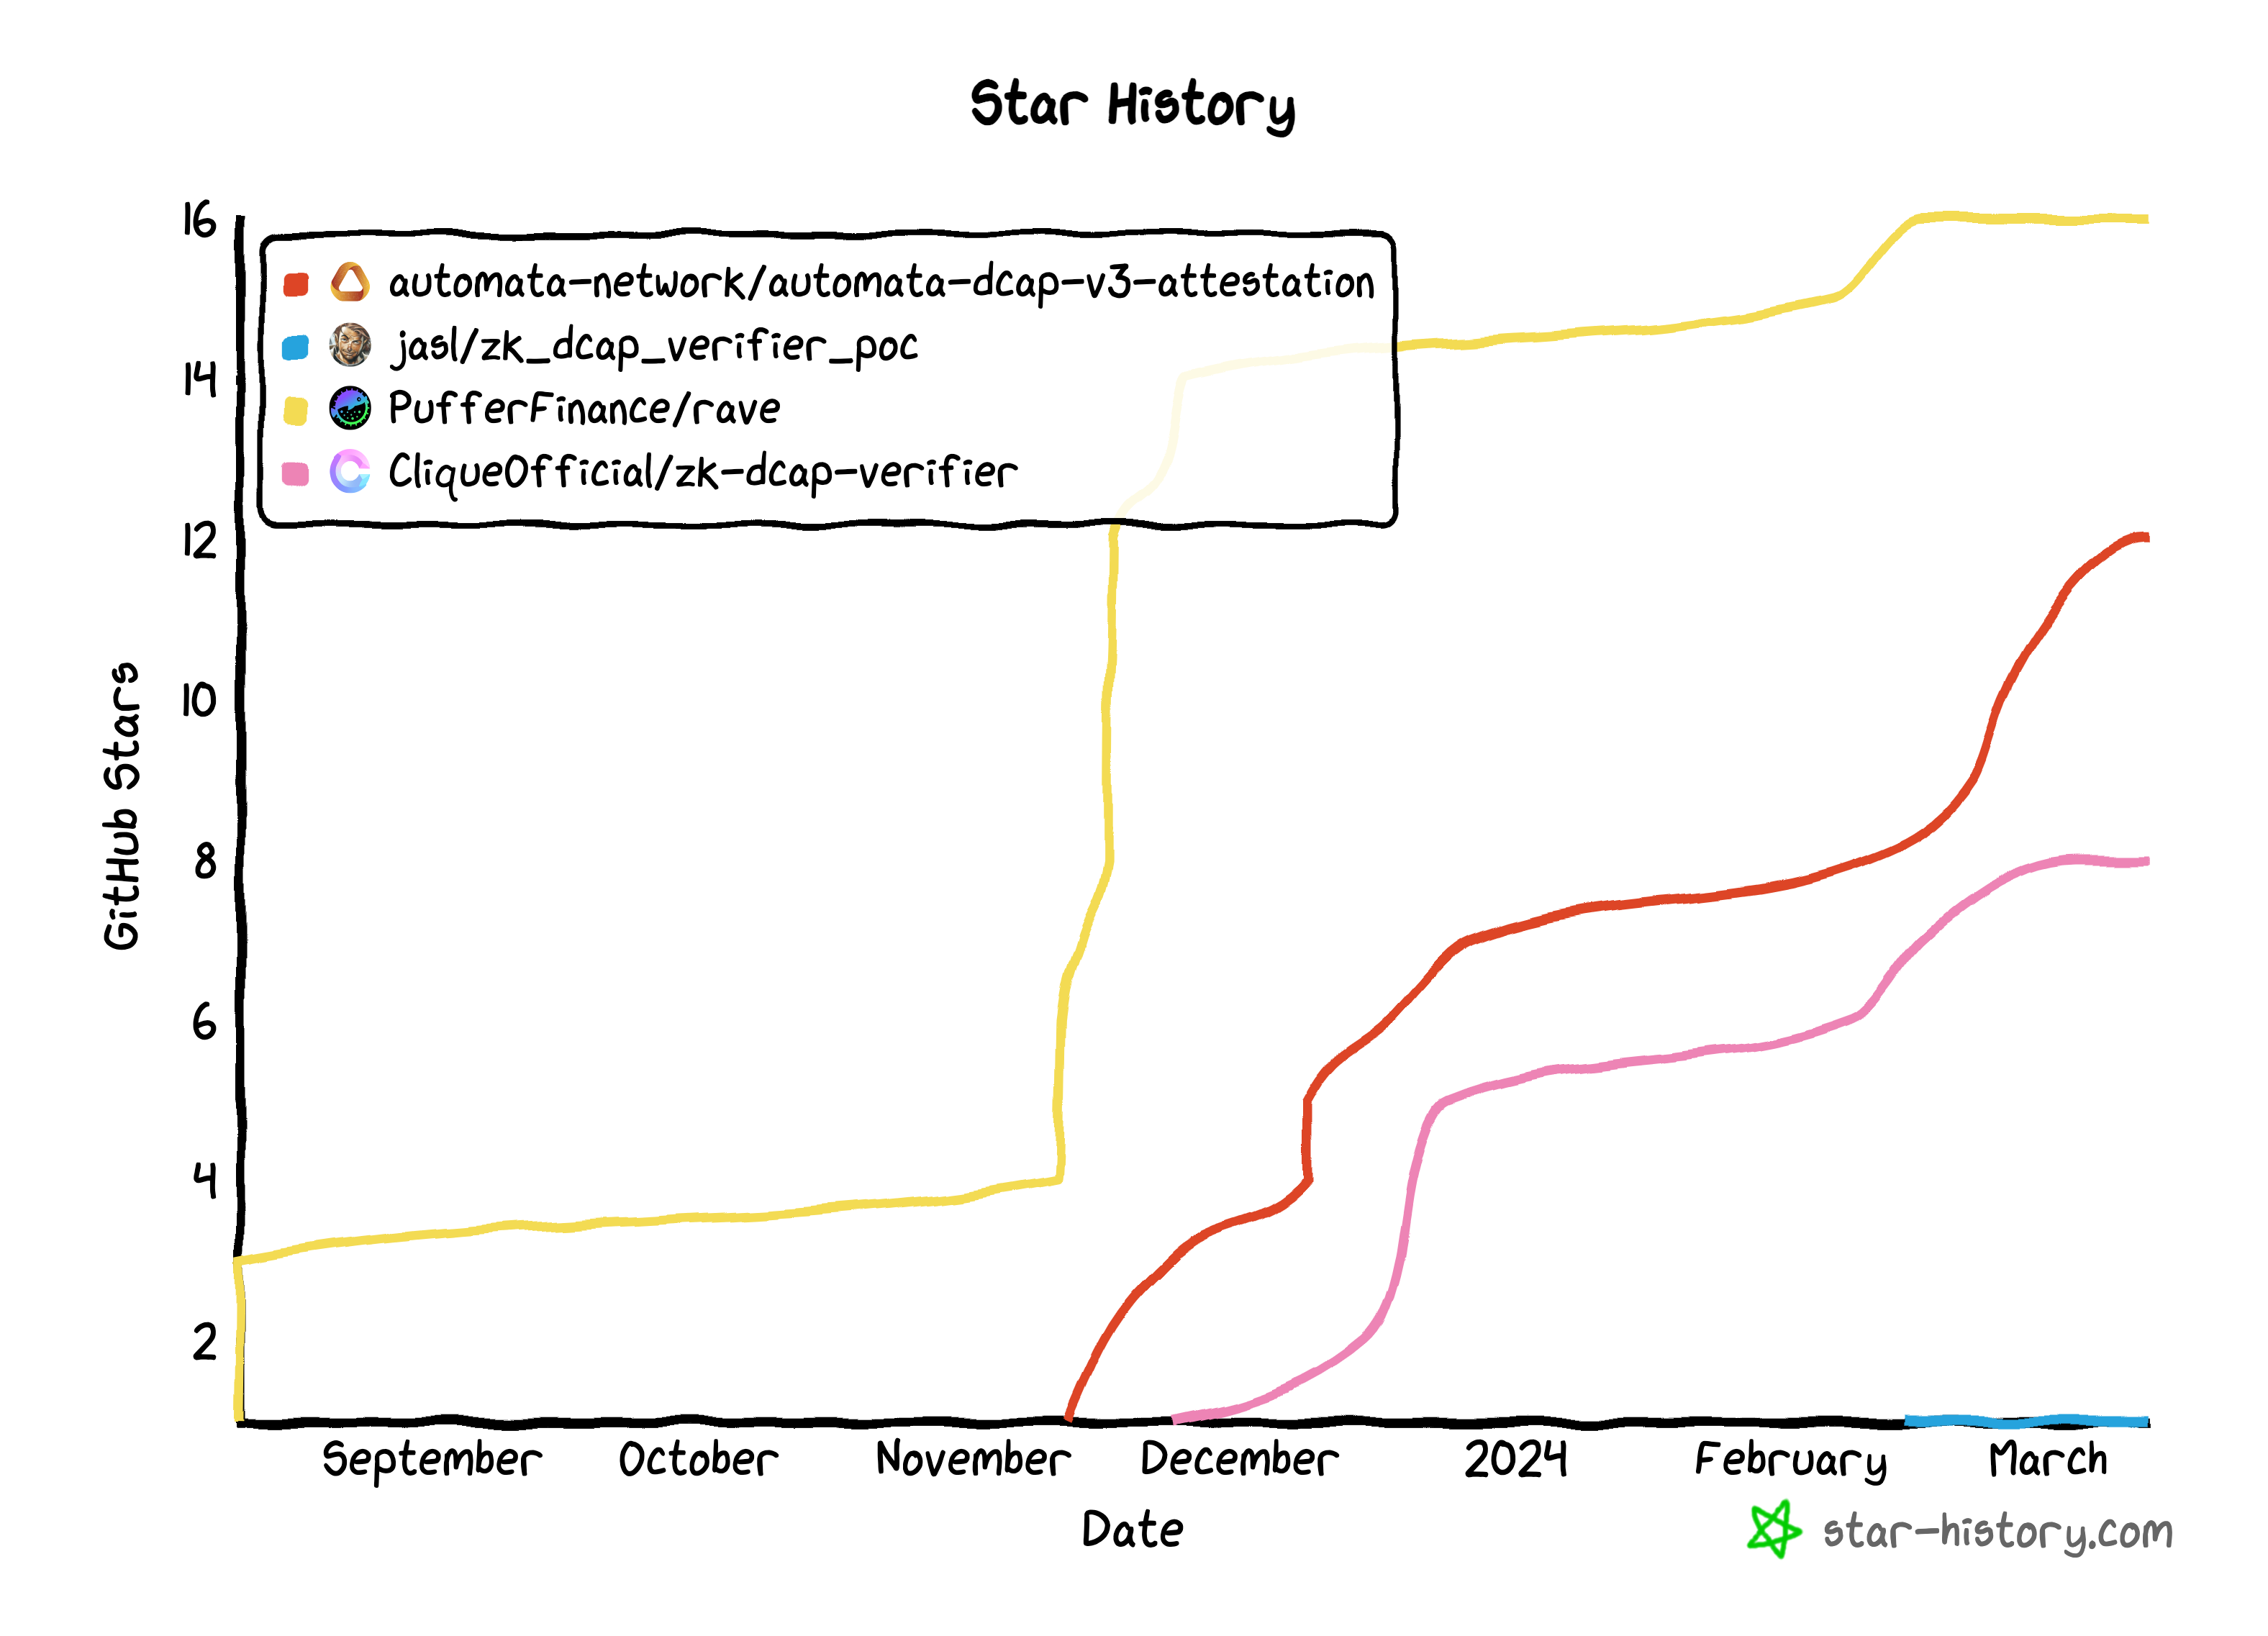 One "raw" way to compare existing on-chain remote attestation verifiers is by looking at historical GitHub stars of their respective repos. Includes: Puffer, Automata, Phala Network, Clique.